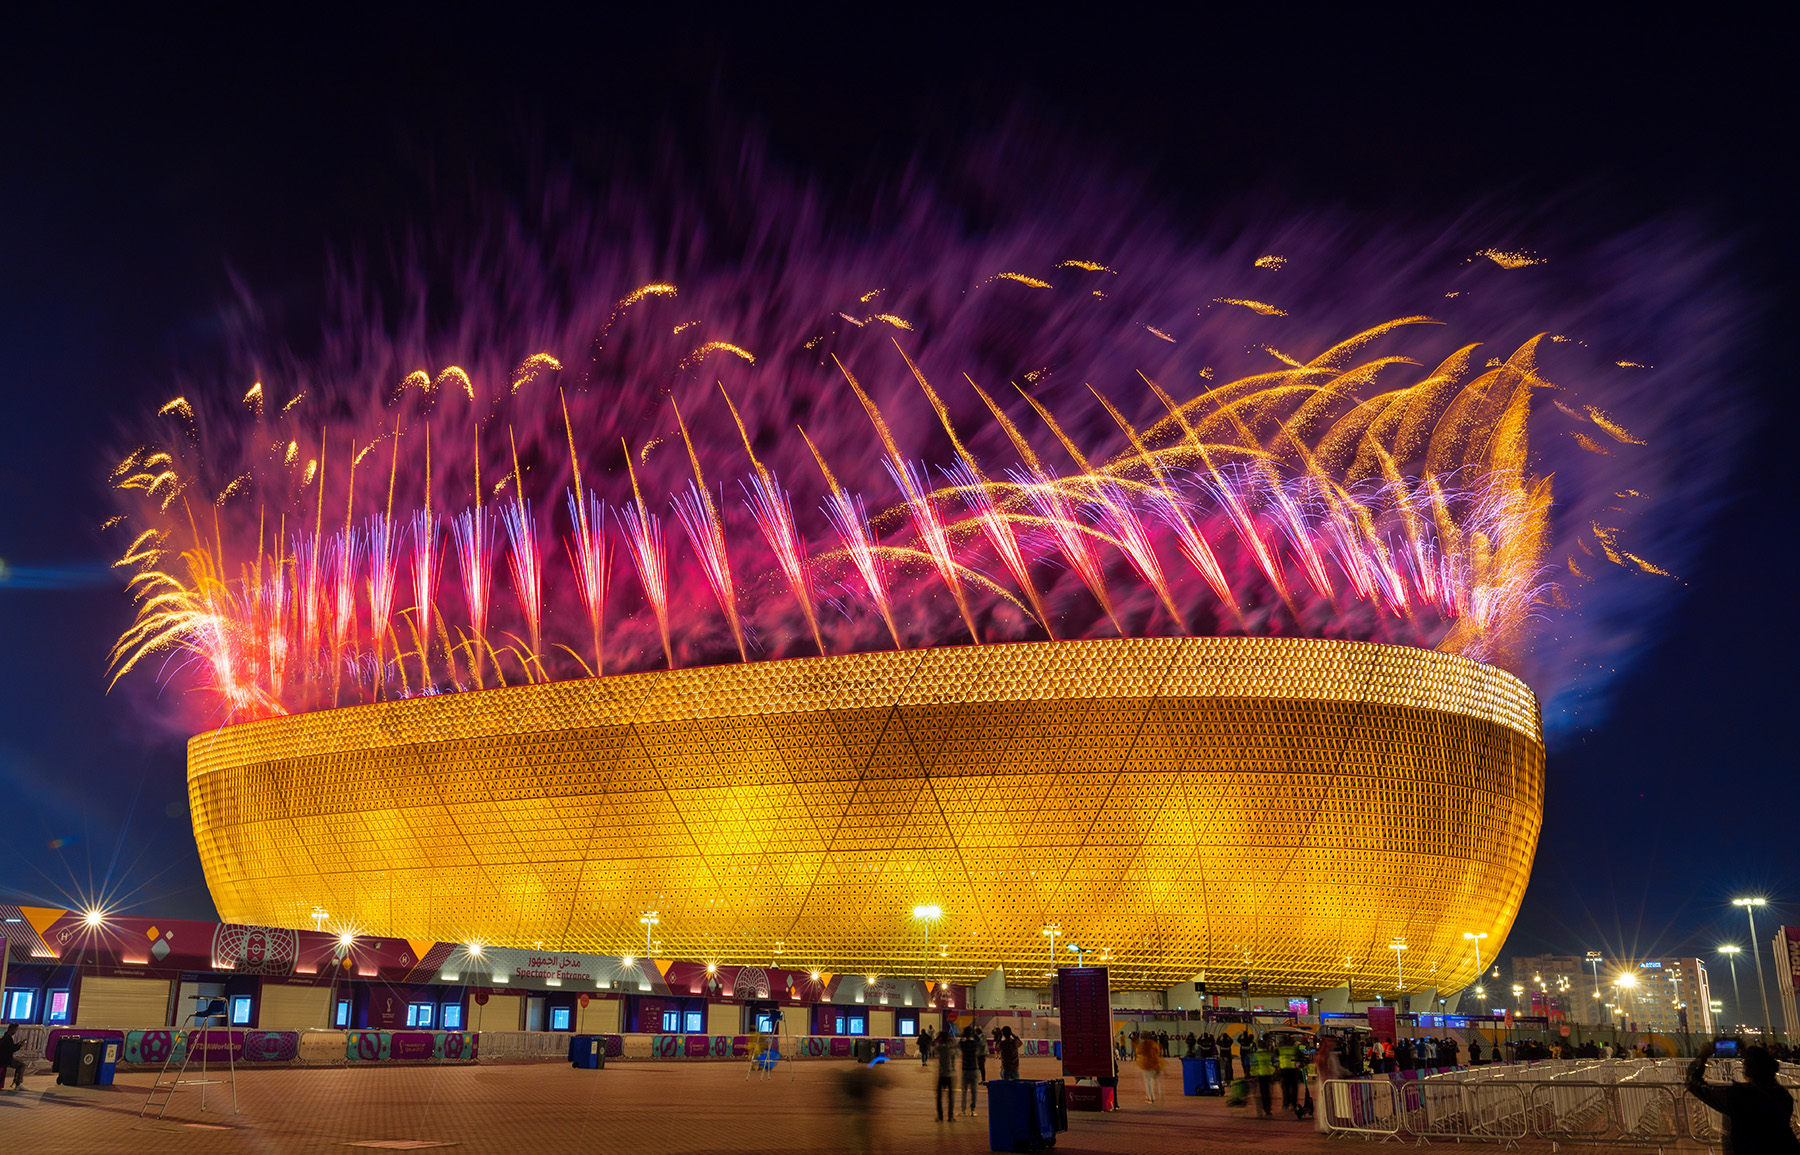 The photograph shows fireworks exploding in the air above the Lusail Stadium at night. 